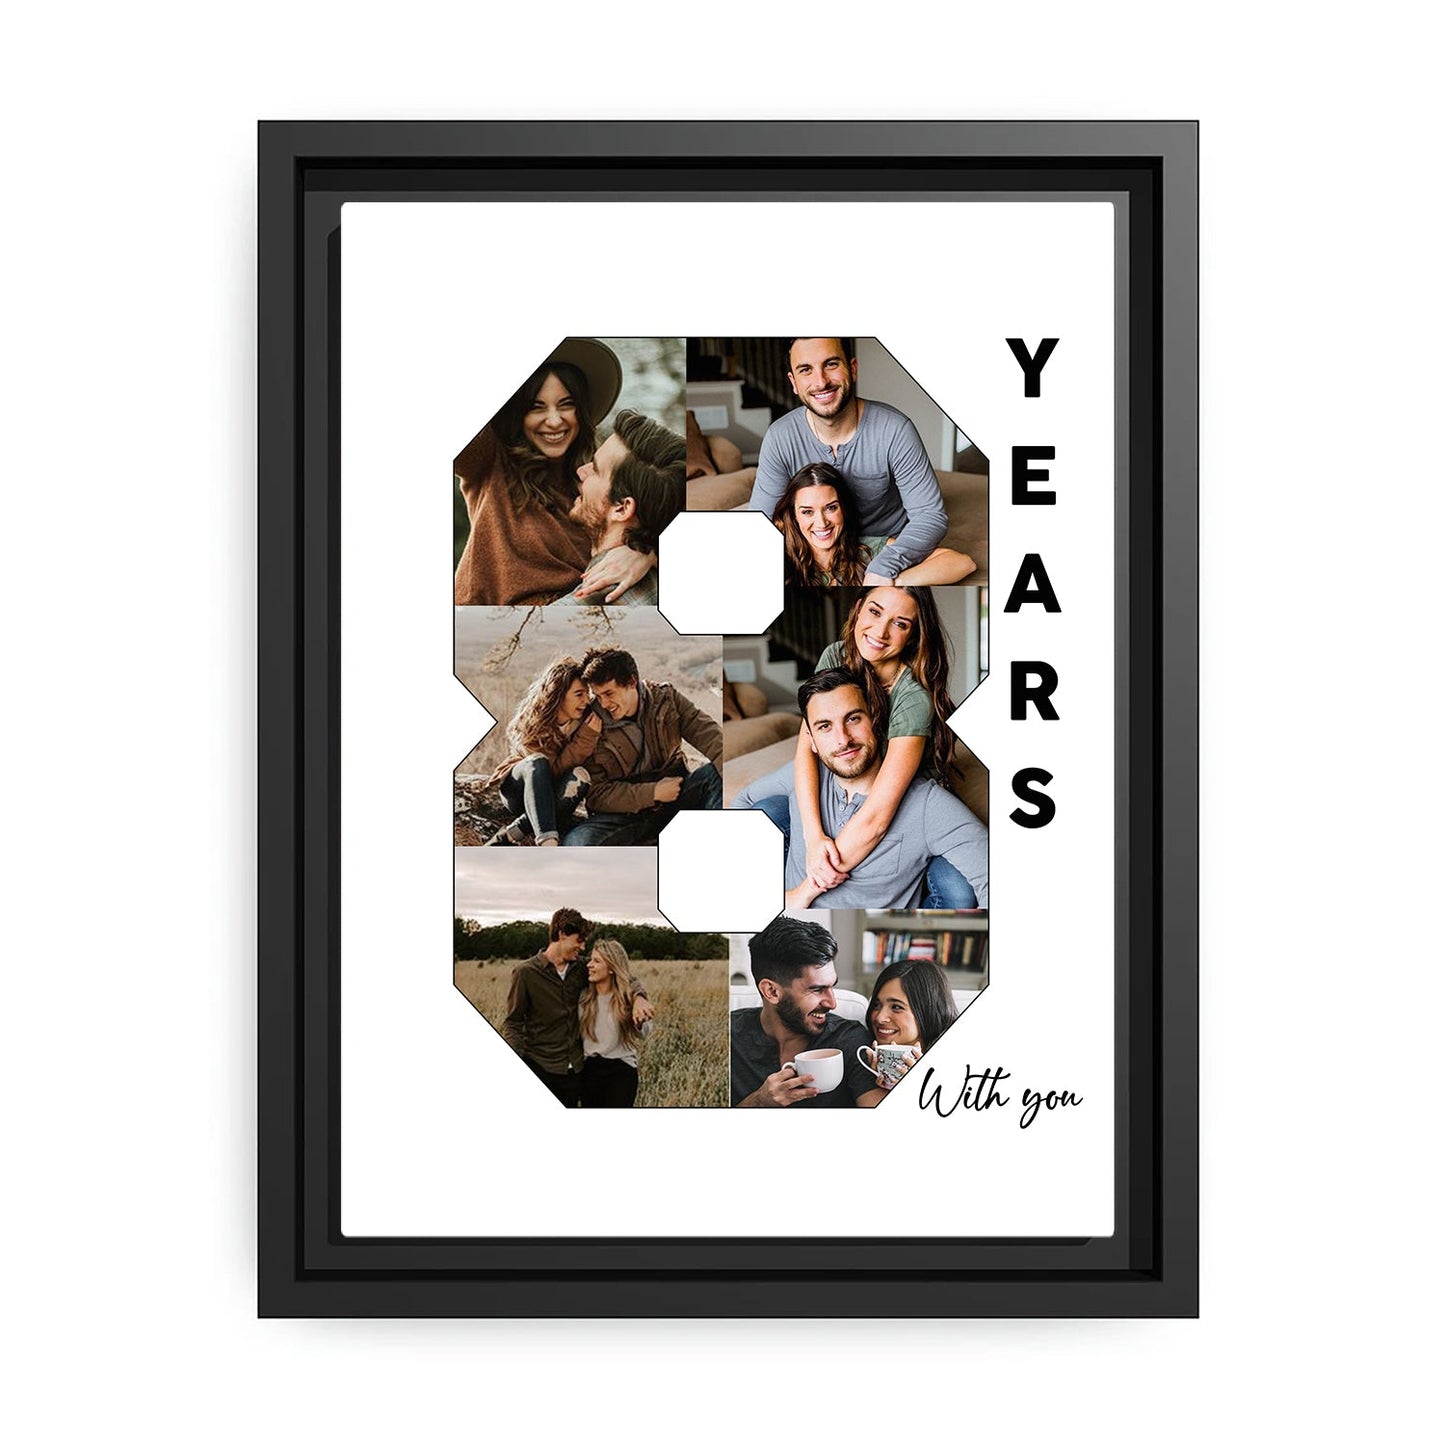 8th Year With You Photo Collage - Personalized 8 Year Anniversary gift for Husband or Wife - Custom Canvas Print - MyMindfulGifts